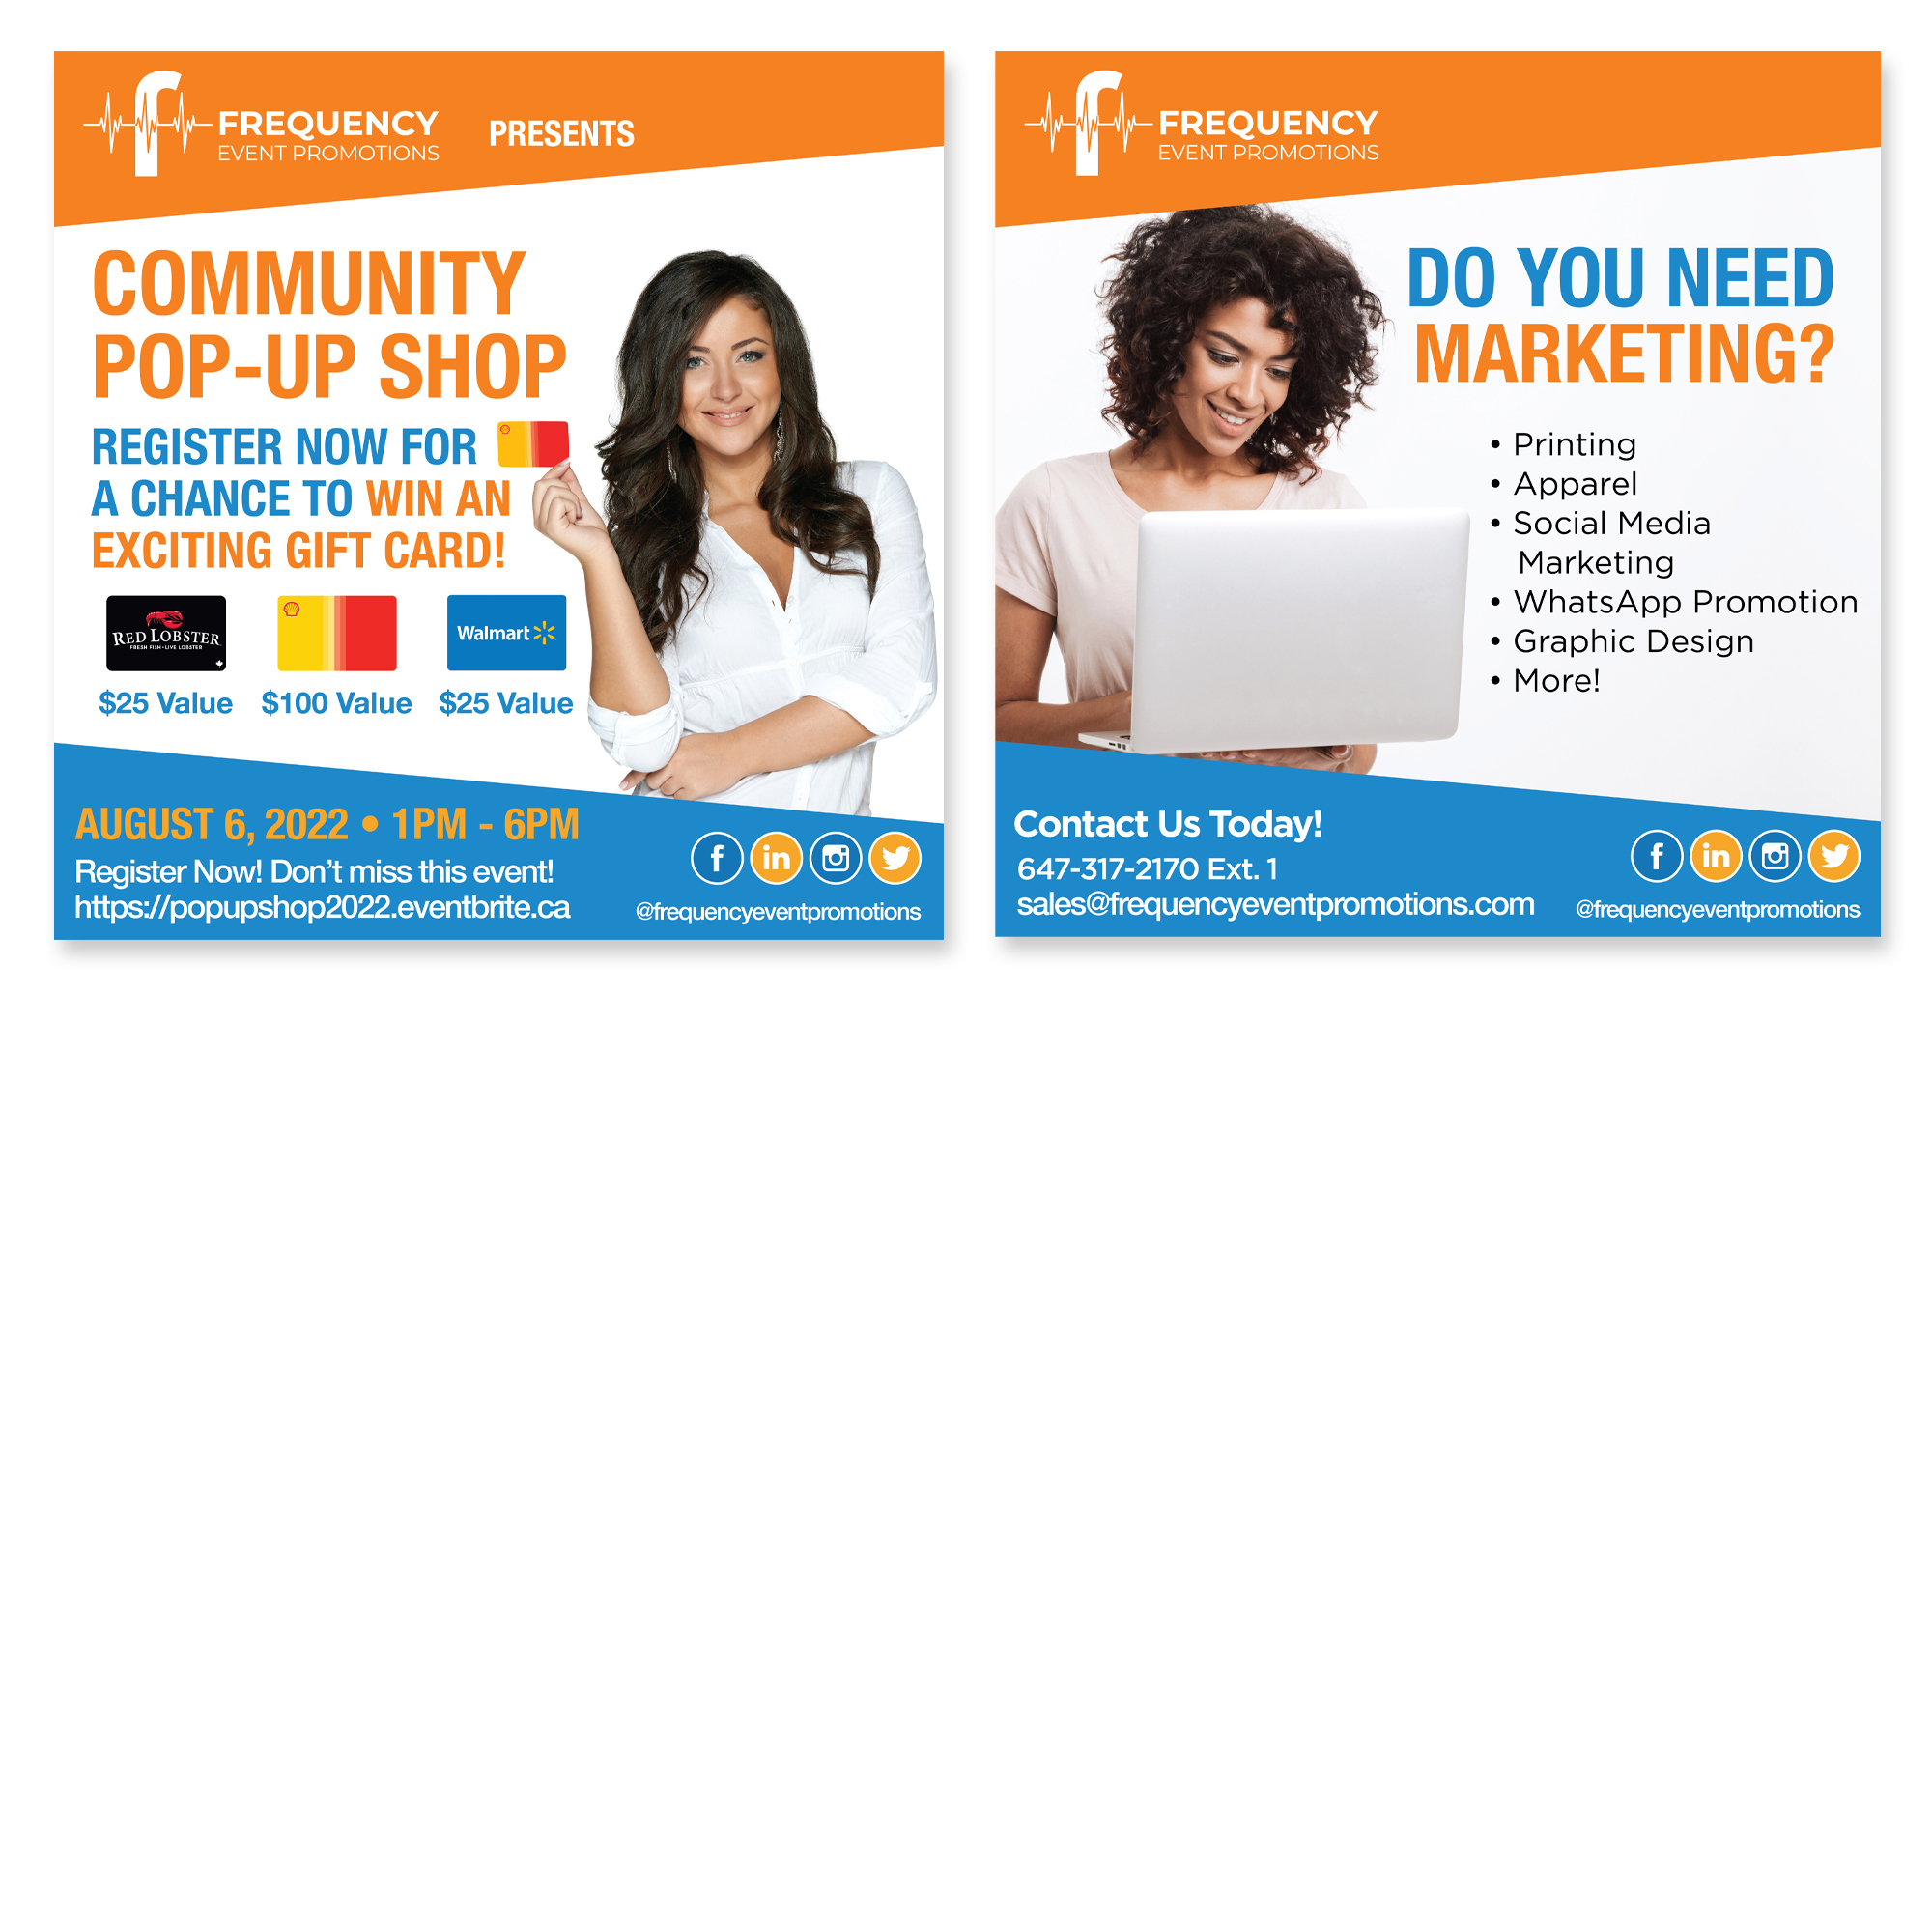 Frequency Event Promotions - Community Pop-Up Event - Social Media Marketing